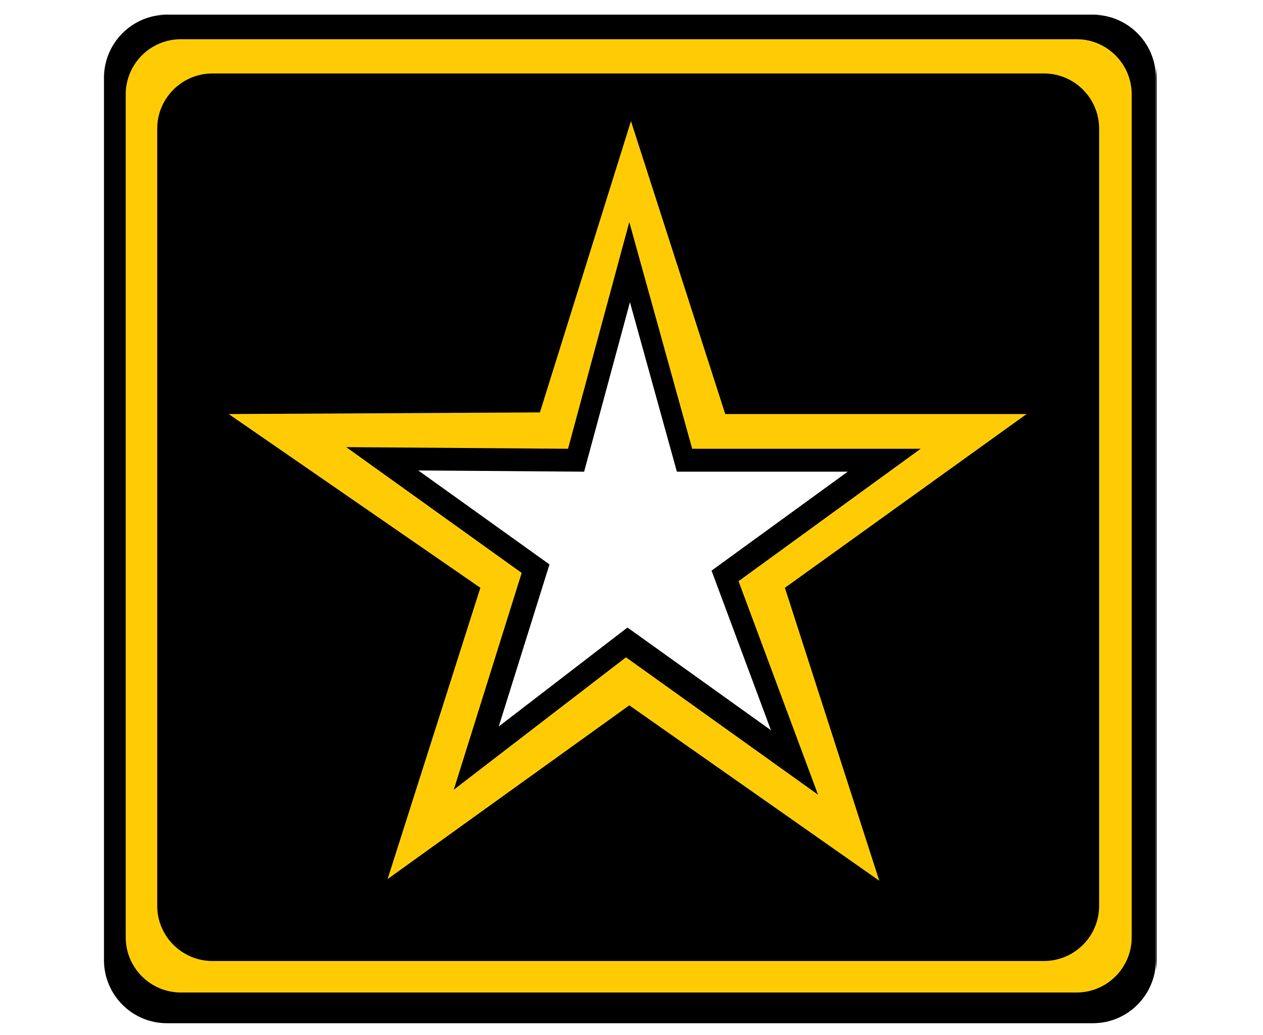 U.S. Army Star Logo - U.S. Army Logo, U.S. Army Symbol, Meaning, History and Evolution